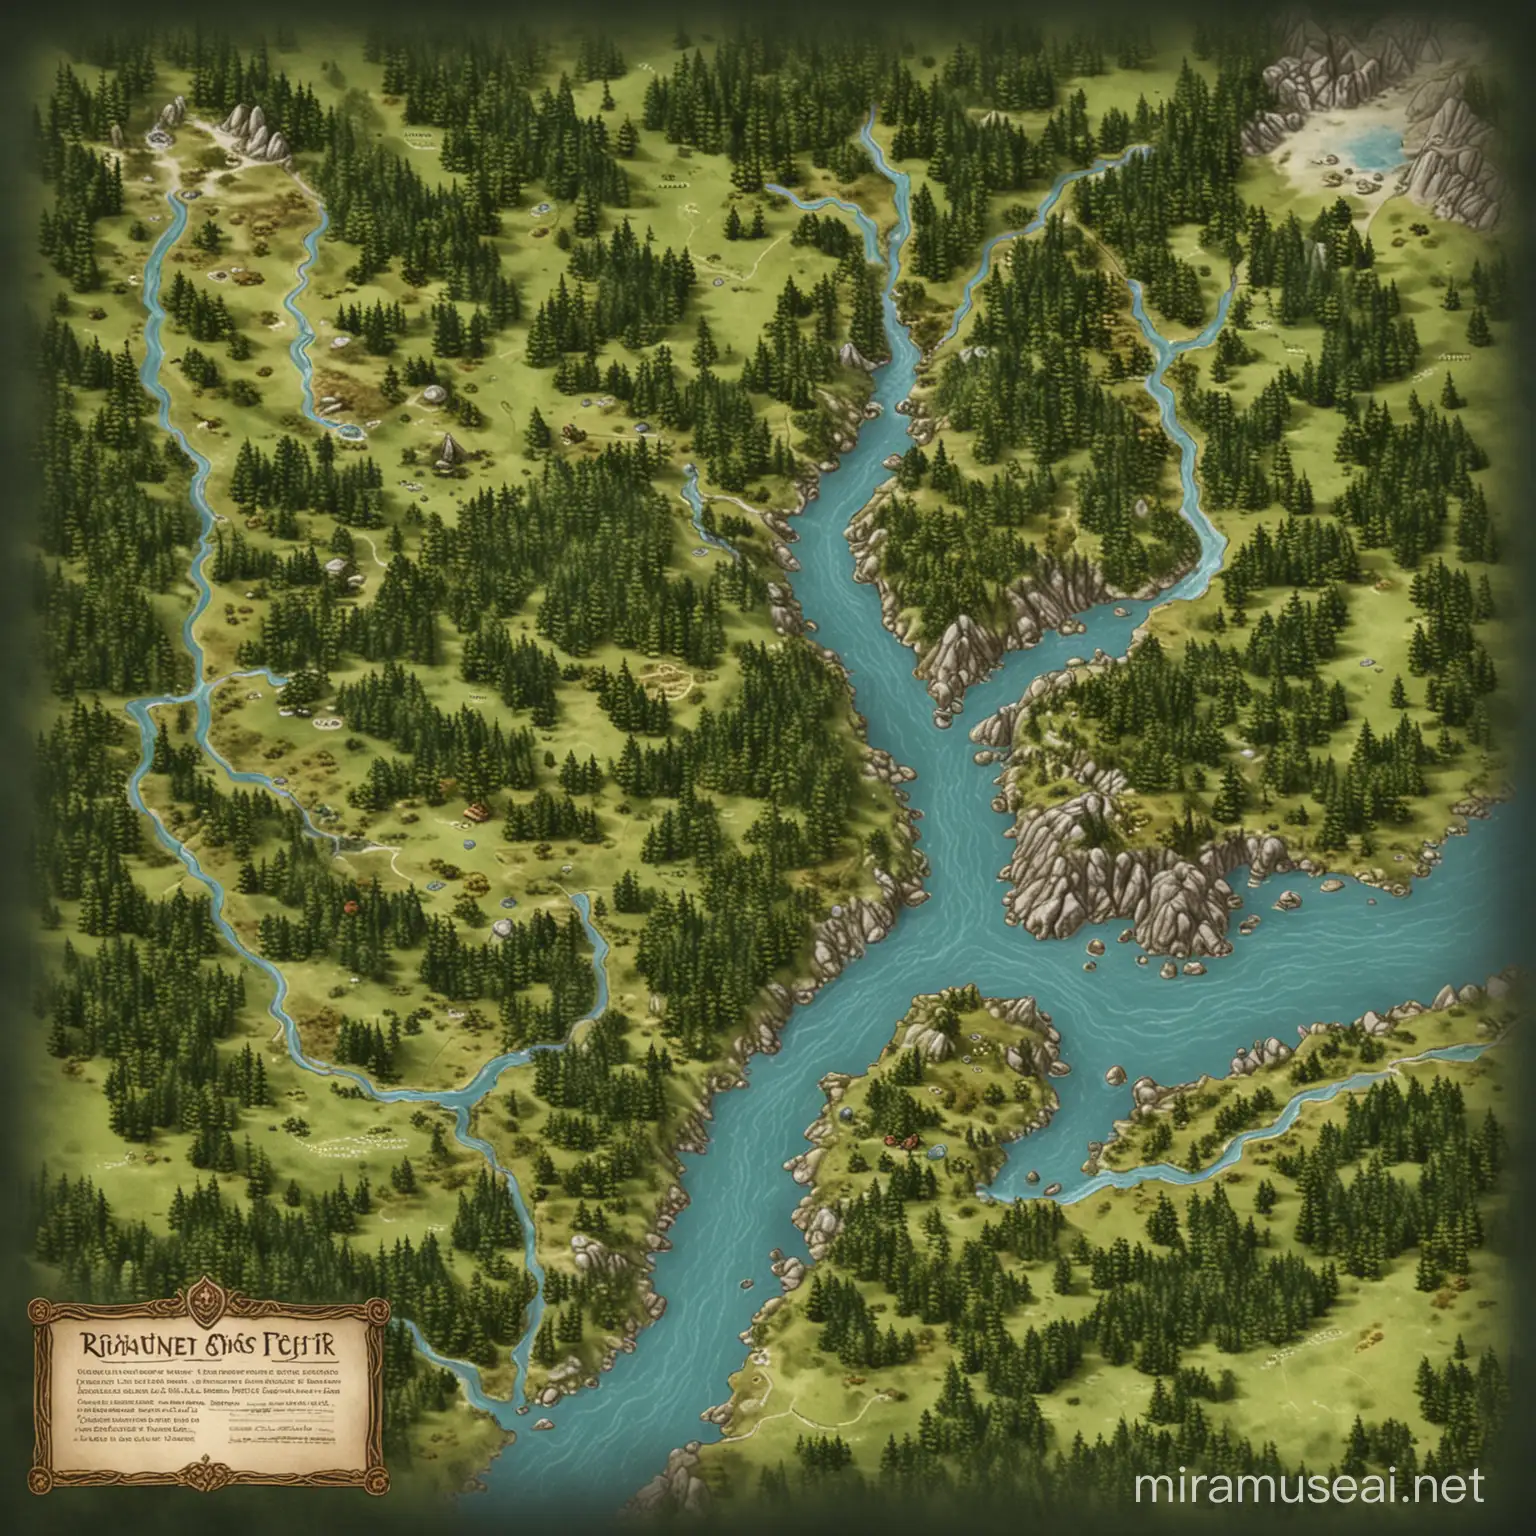 continent, dnd map, location, small forests, small mountain range, river,